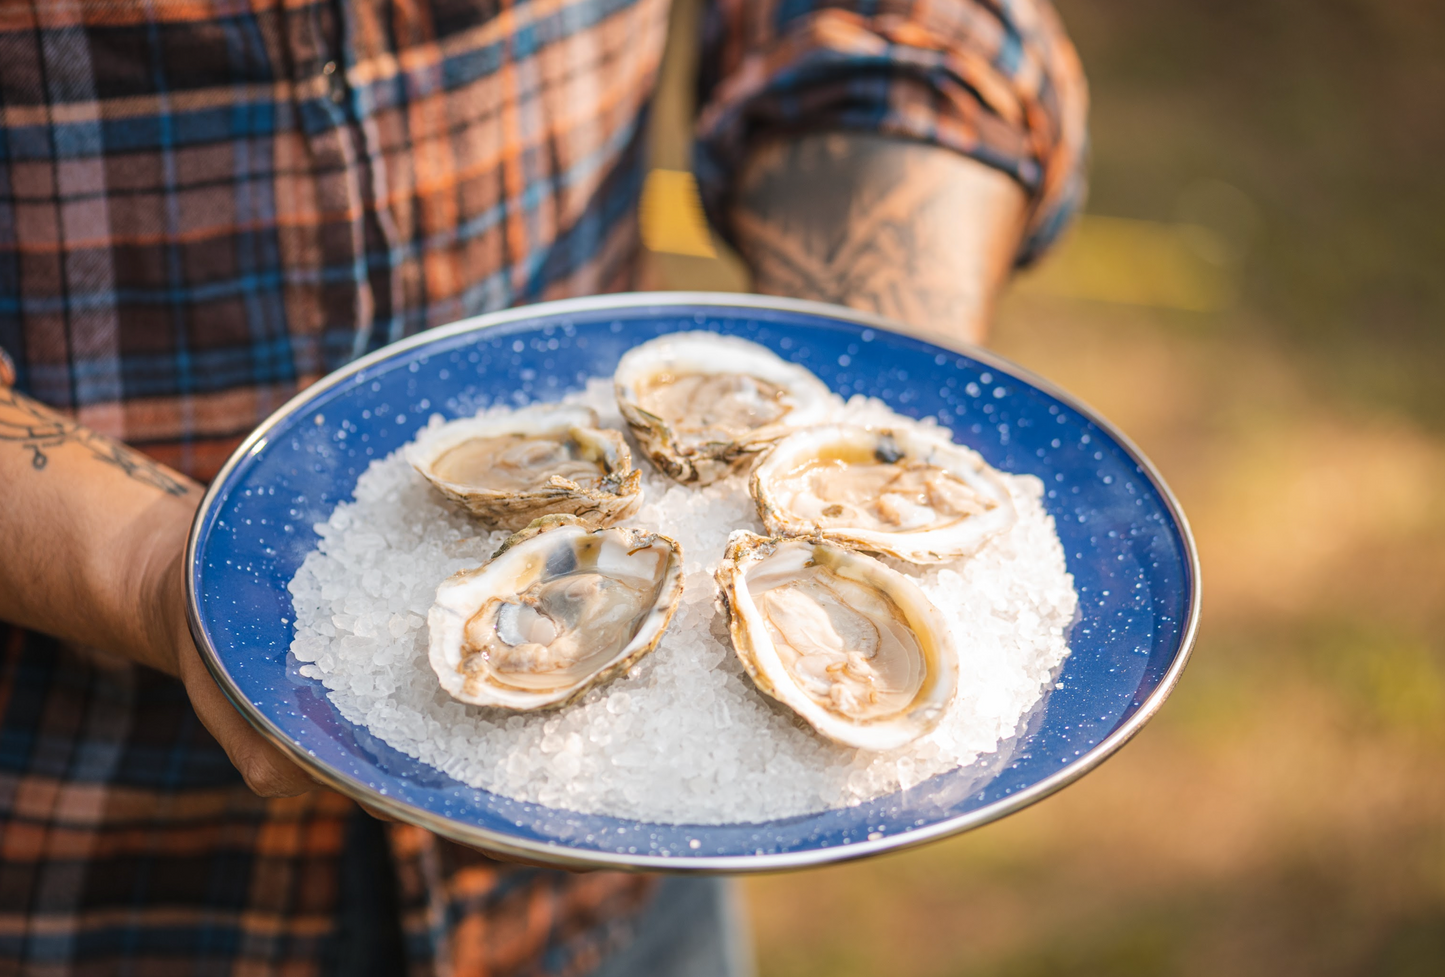 Oyster Love: Oysters and Pop Culture